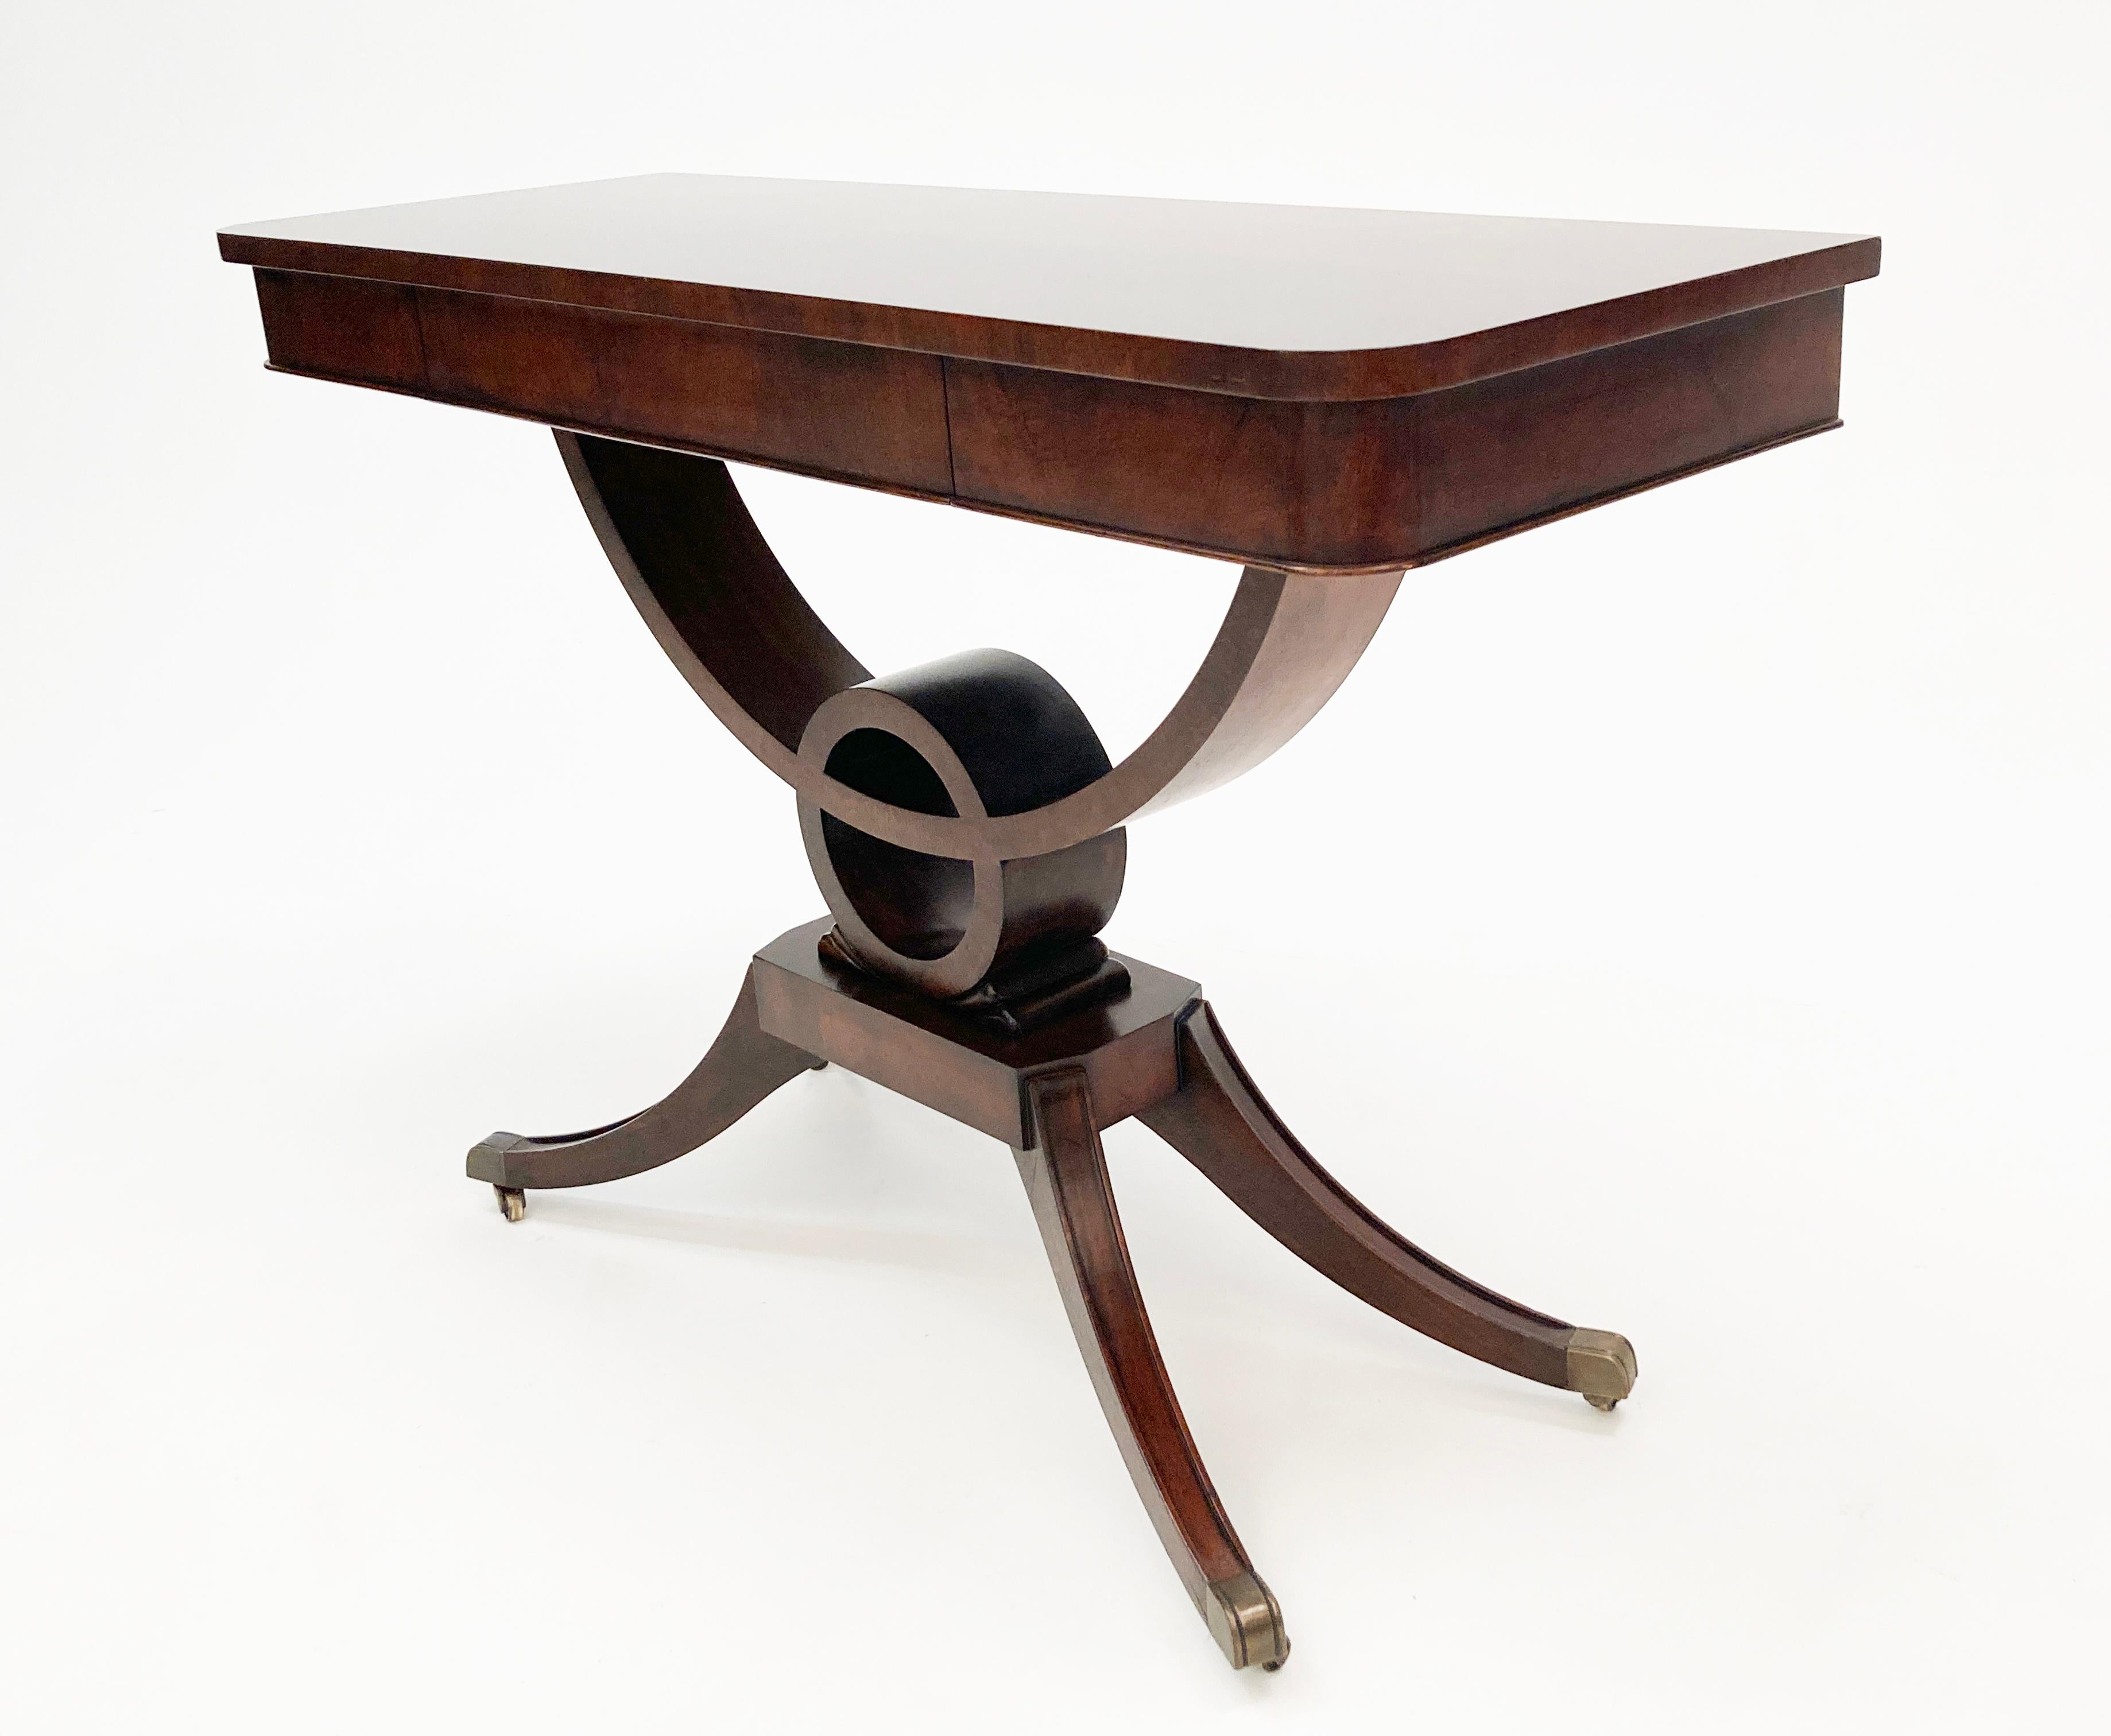 The more I see this piece, the more in love with it I become. From the beautiful curves to the richness of the tiger-wood mahogany, it is simply stunning. With a single front hidden drawer, this piece is also very functional! This table design